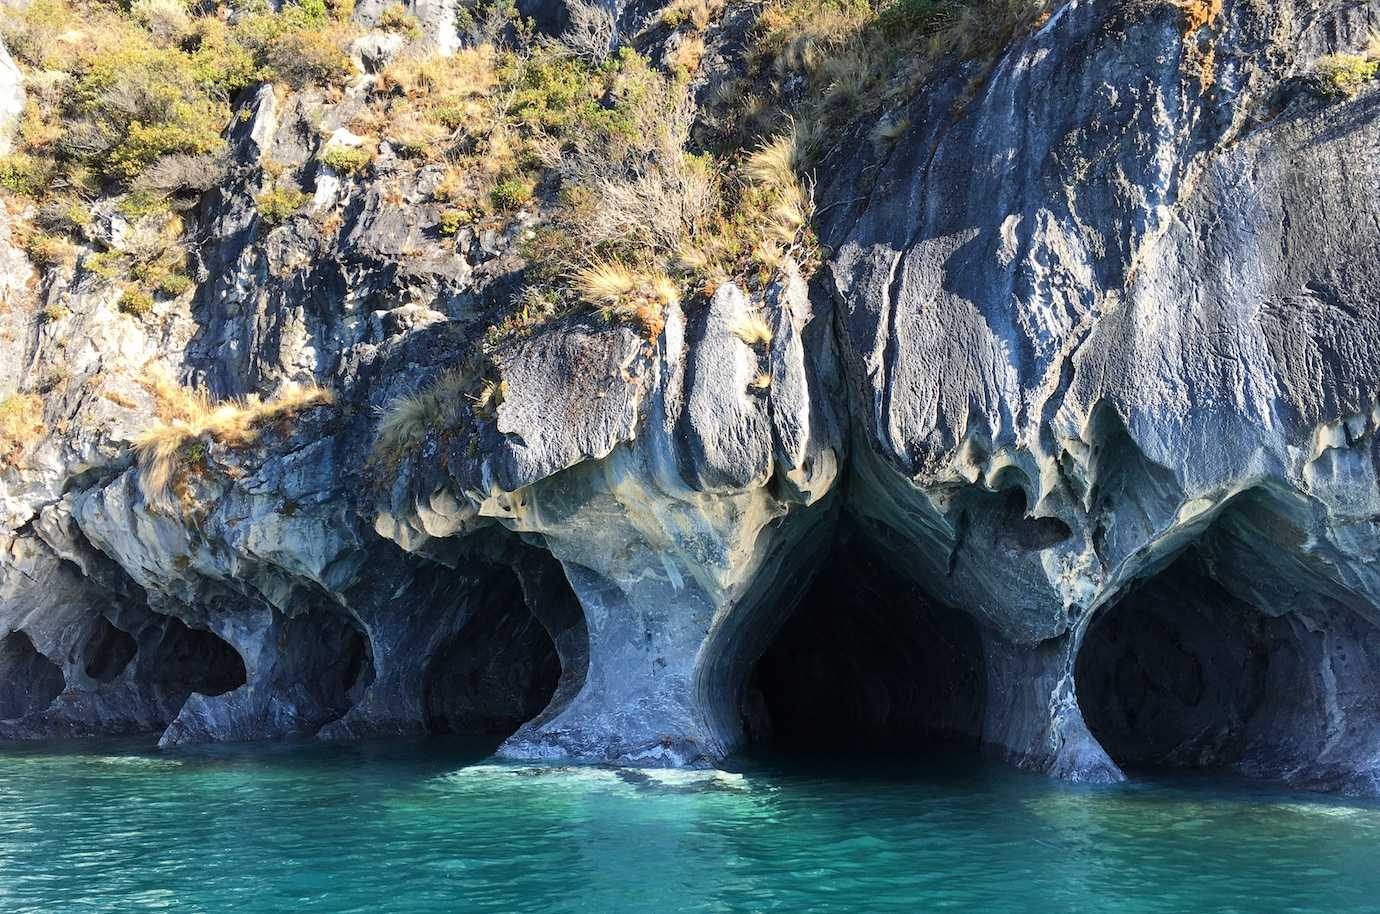 On this Day: The Marble Caves in Chile